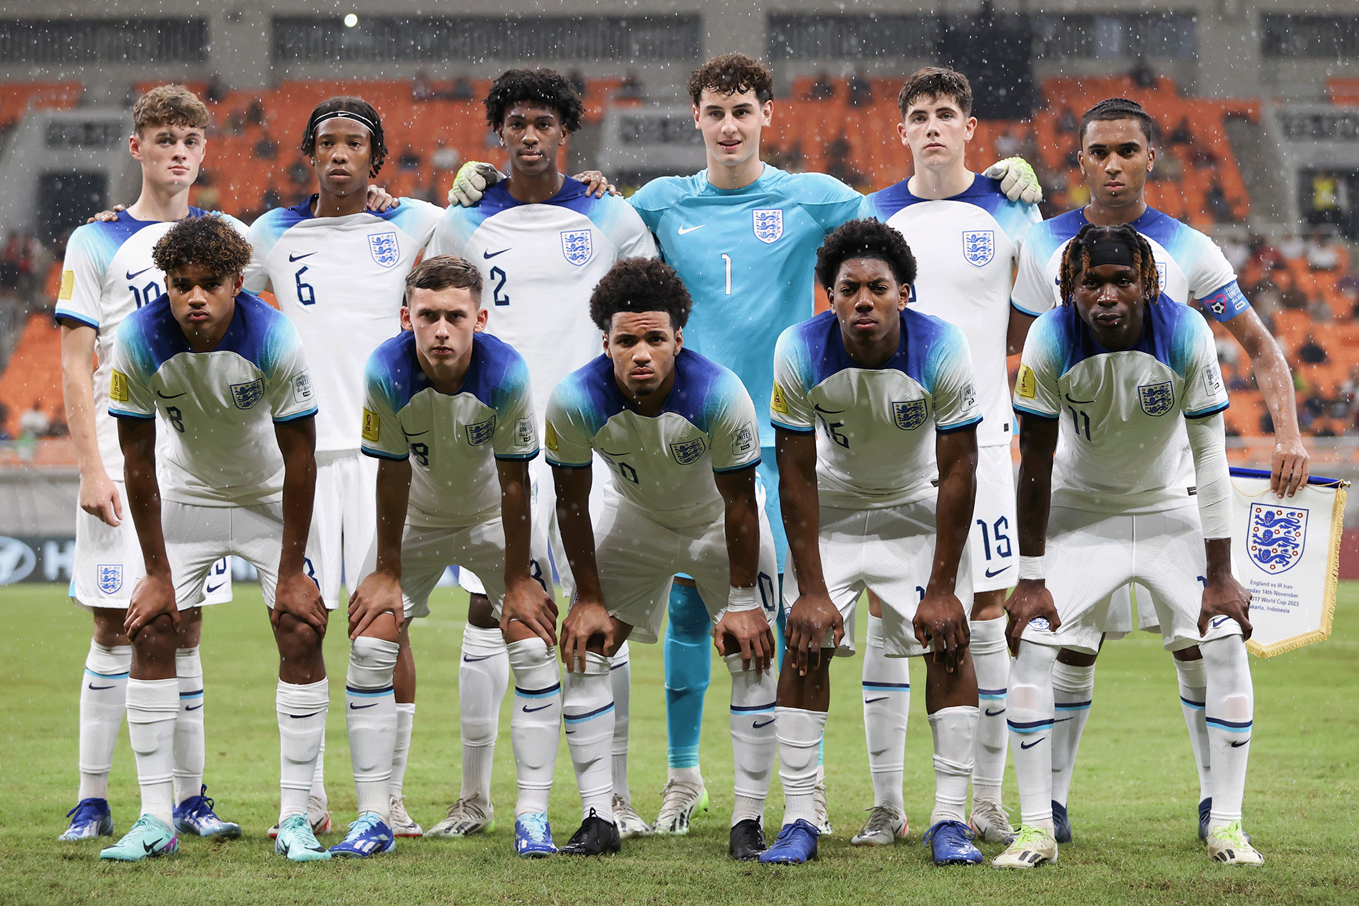 Joe Johnson with his England U17 teammates before their World Cup group stage win against Iran.